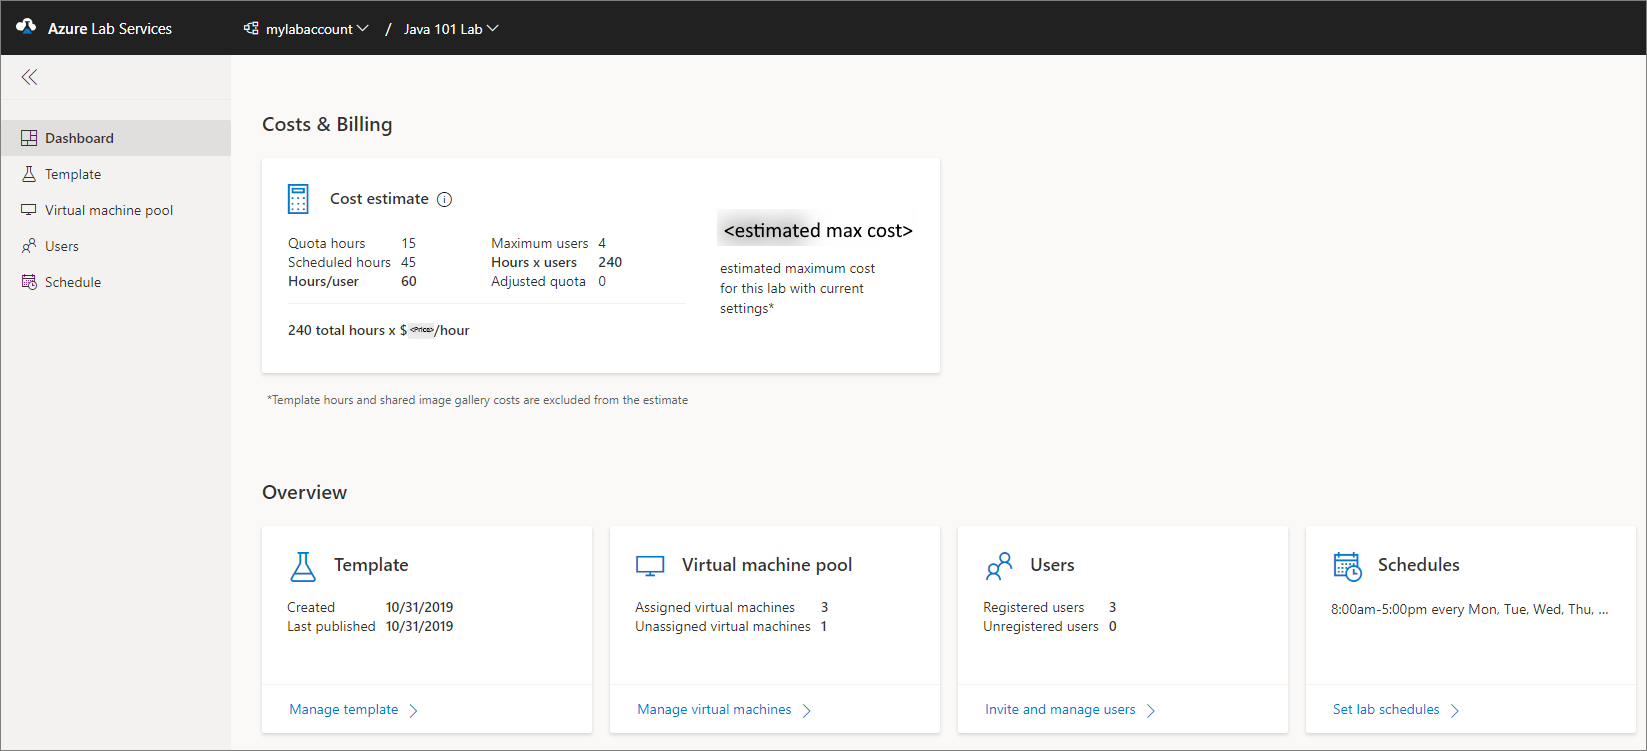 Screen capture shows the dashboard view of a lab in Azure Lab Services